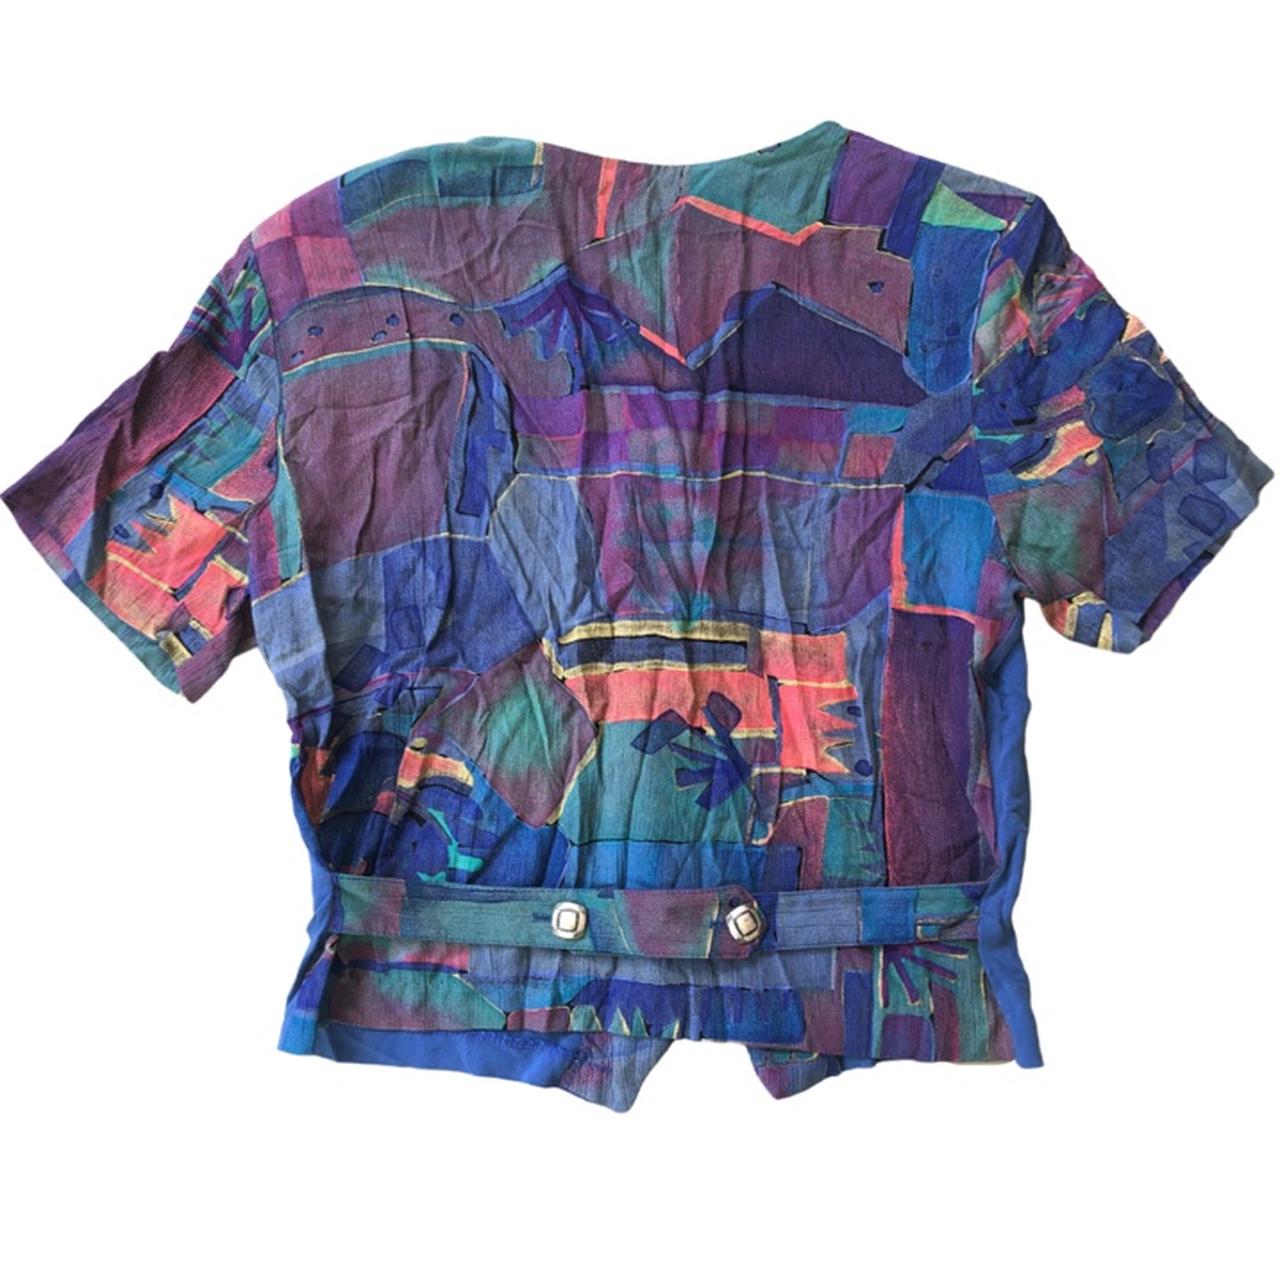 Product Image 2 - 80s Multi-Colored Geometric Printed Short